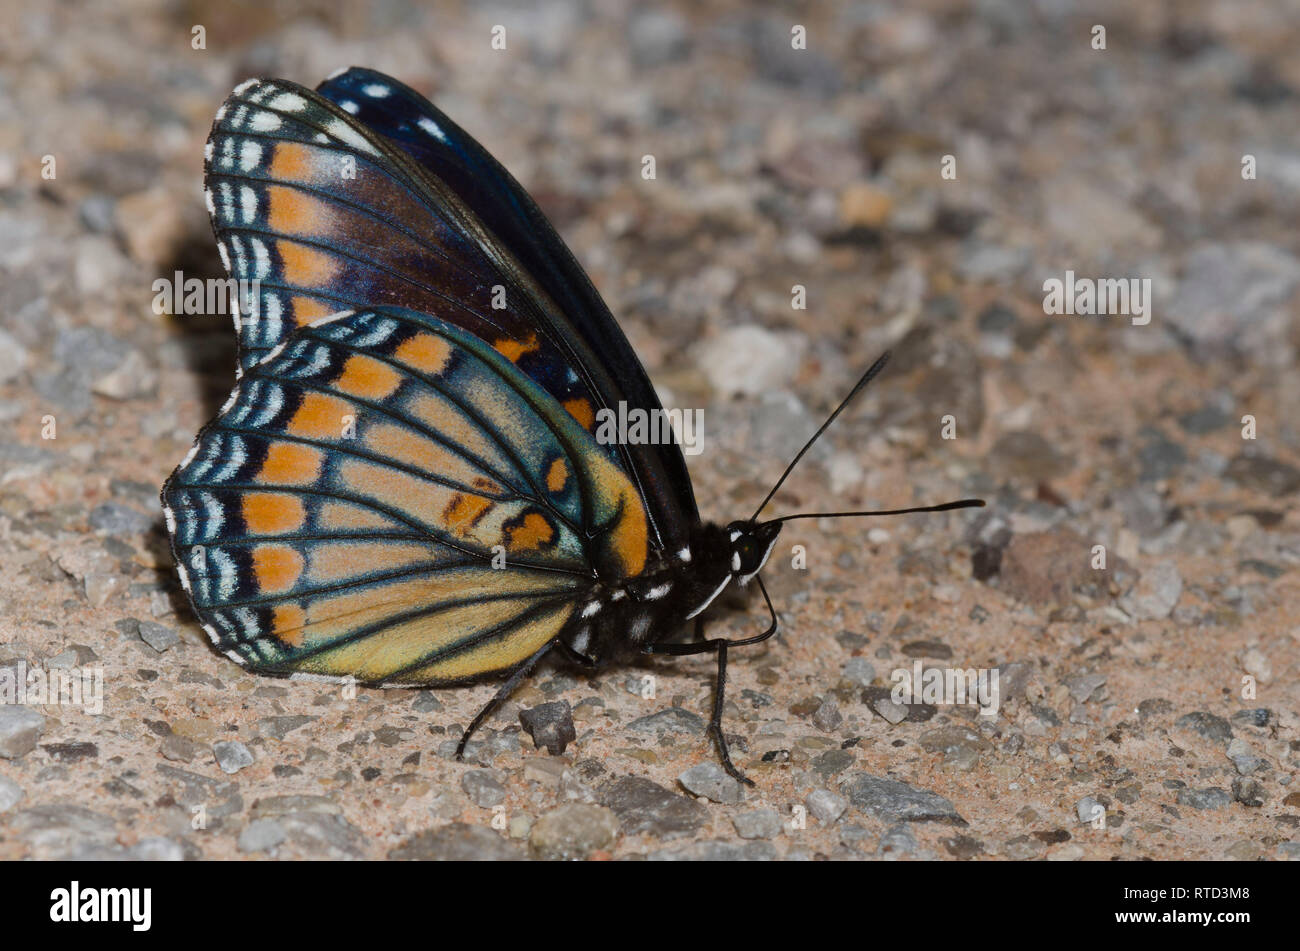 Viceroy and Red-spotted Purple, Limenitis archippus archippus X Limenitis arthemis astyanax, hybrid form Rubidus Stock Photo